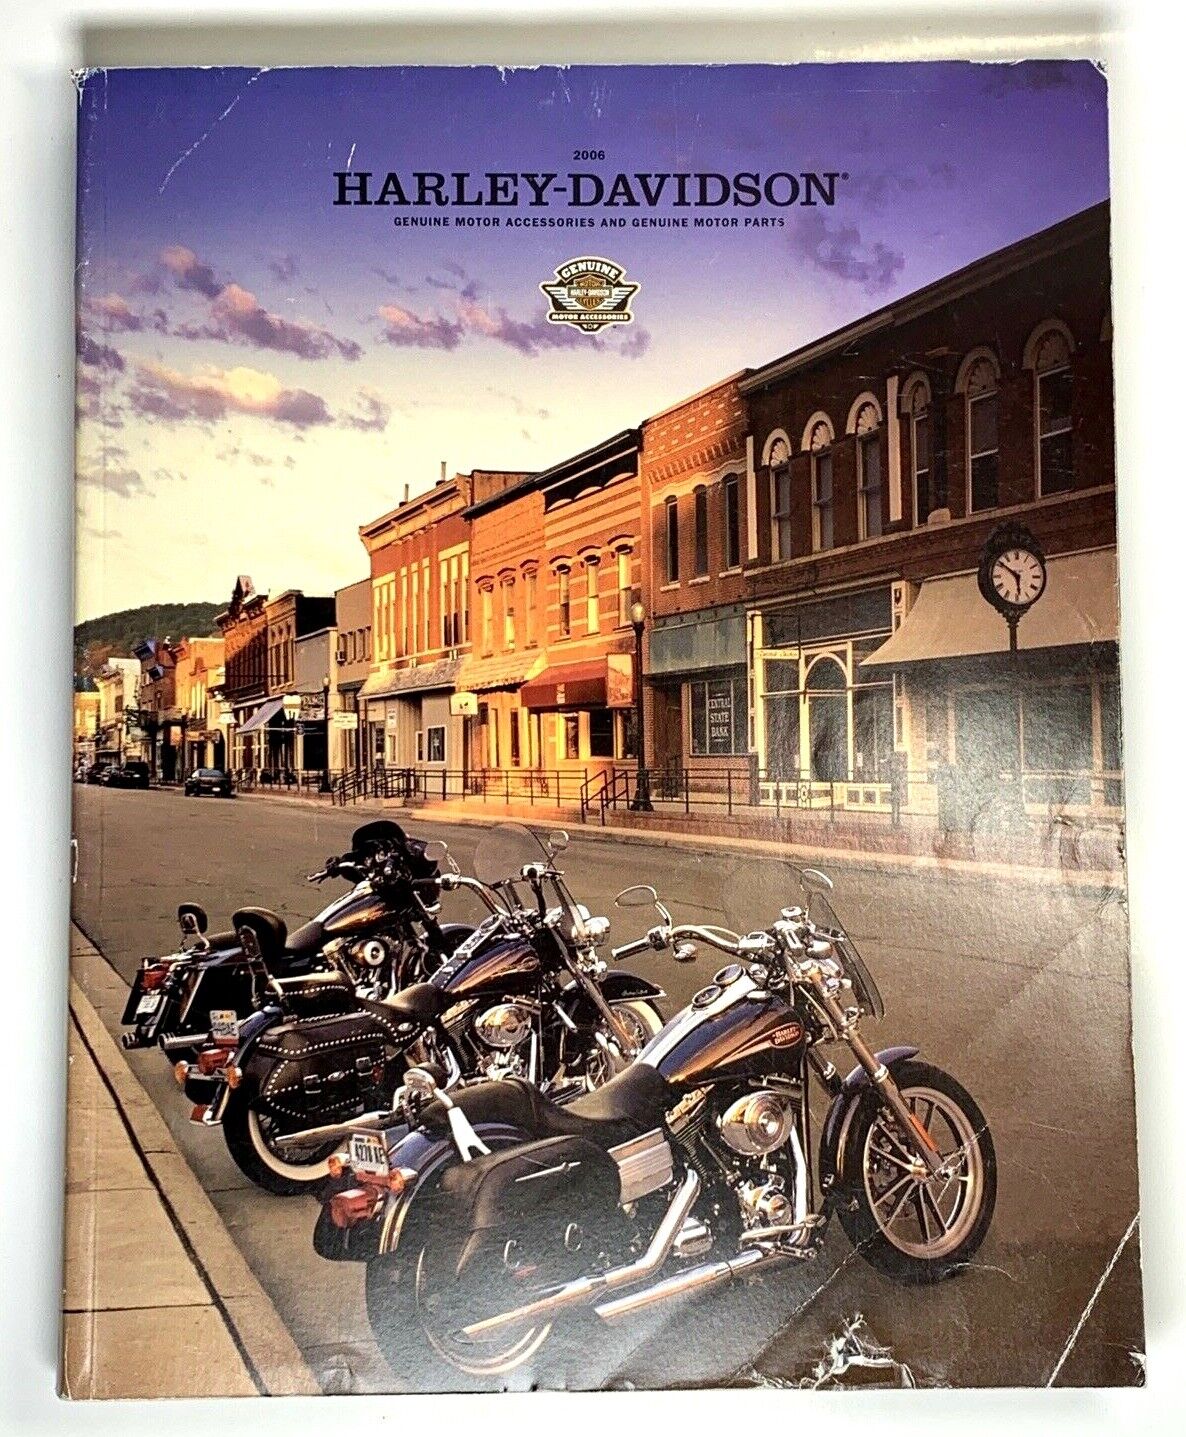 2006 HARLEY DAVIDSON Genuine Motor Accessories And Parts Catalog 832 Pages Color